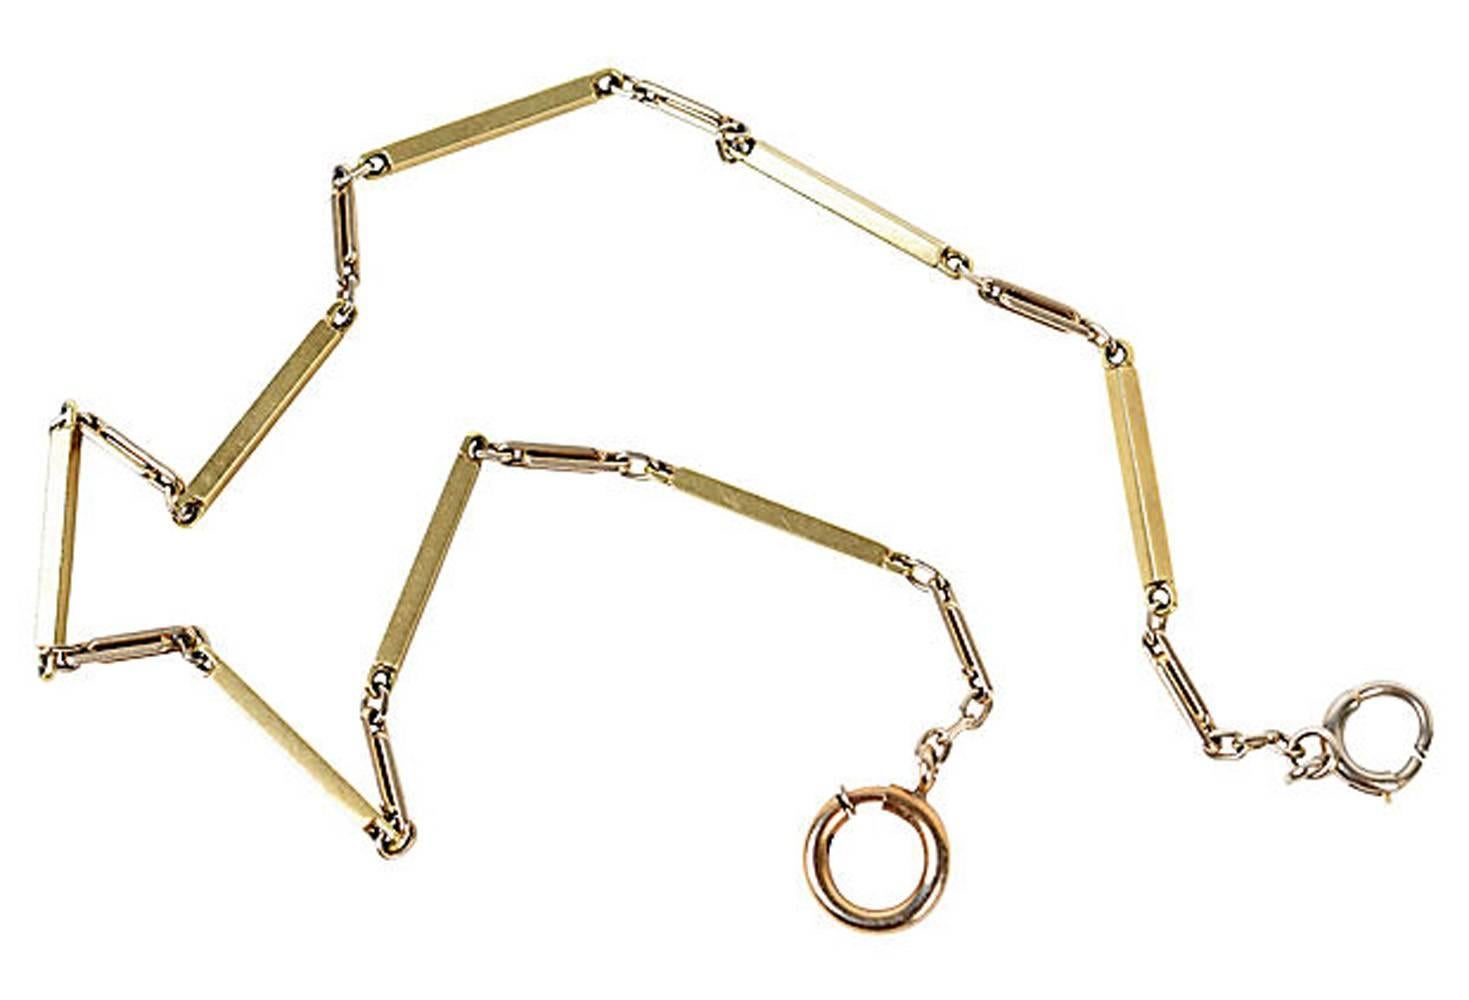 Art Deco Solid 14K Gold Watch Chain